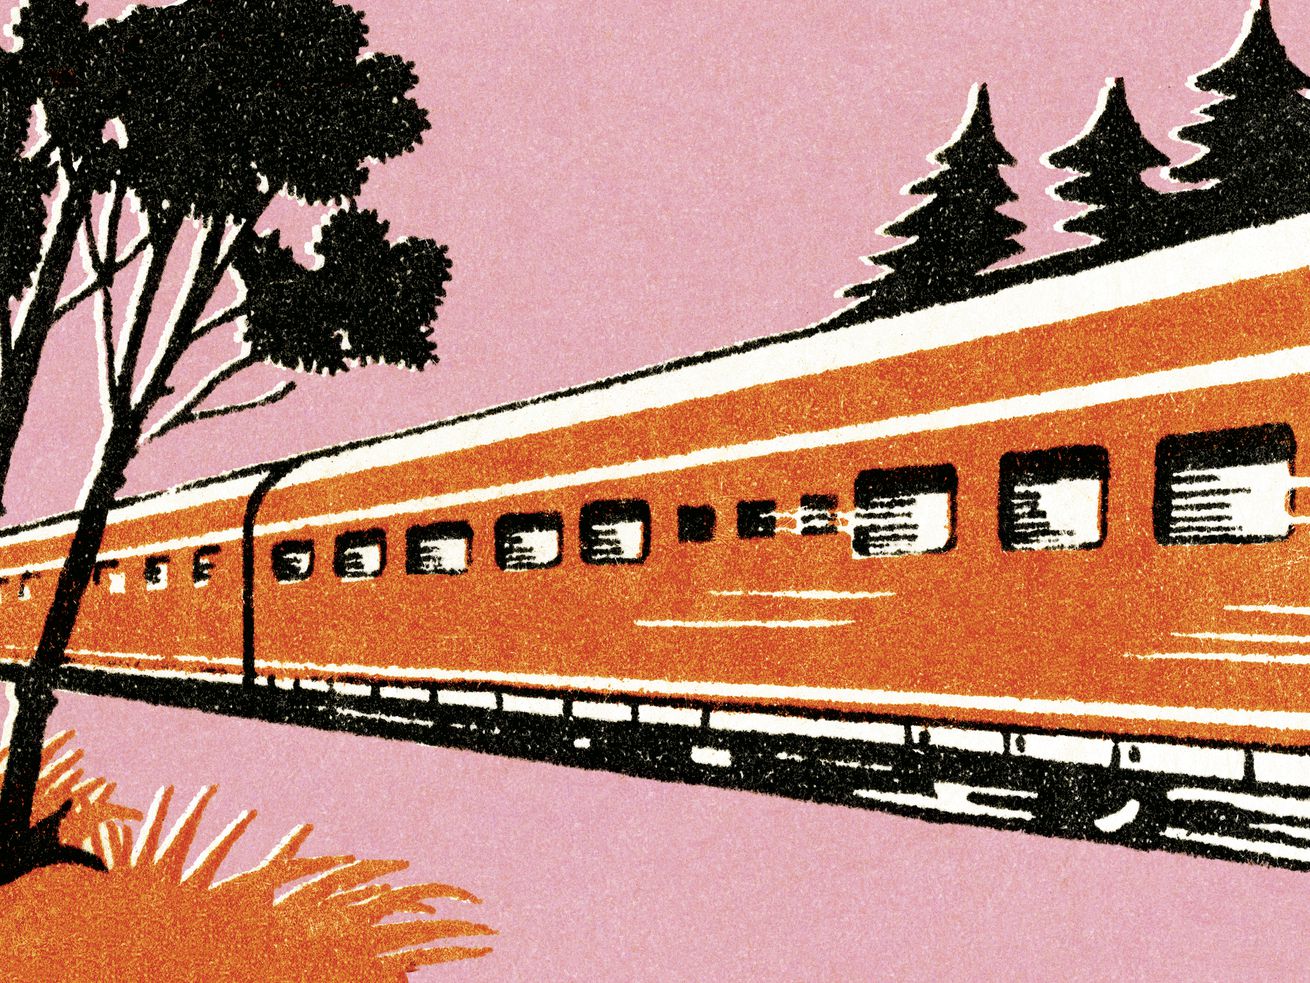 How — and why — to take the train across the country